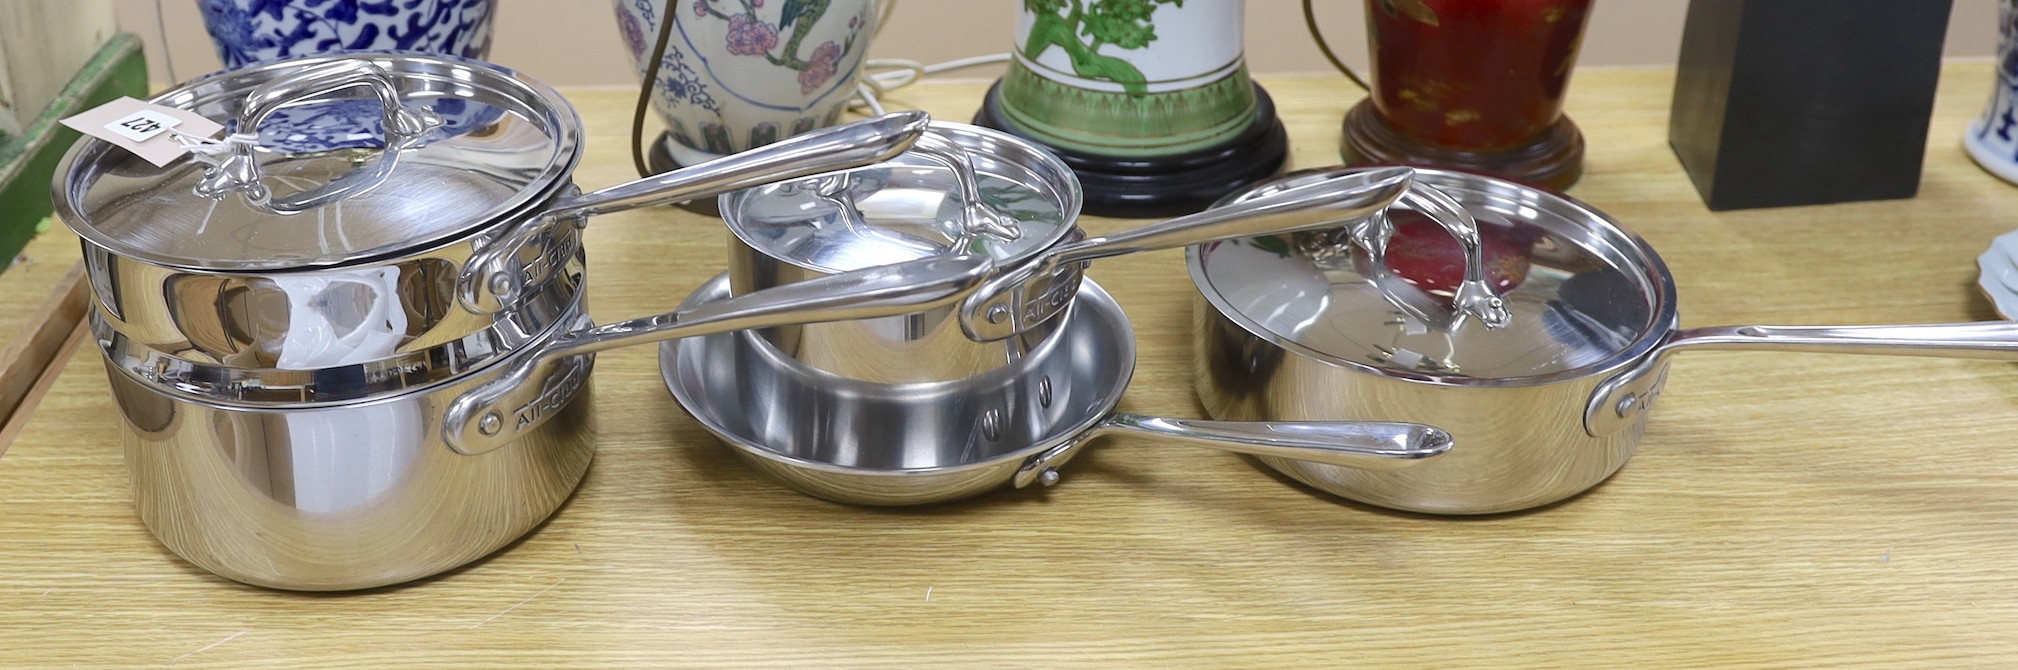 An “All Clad”, stainless steel steamer saucepan and cover, two other saucepans and covers and a matching frying pan, steamer 16cms high